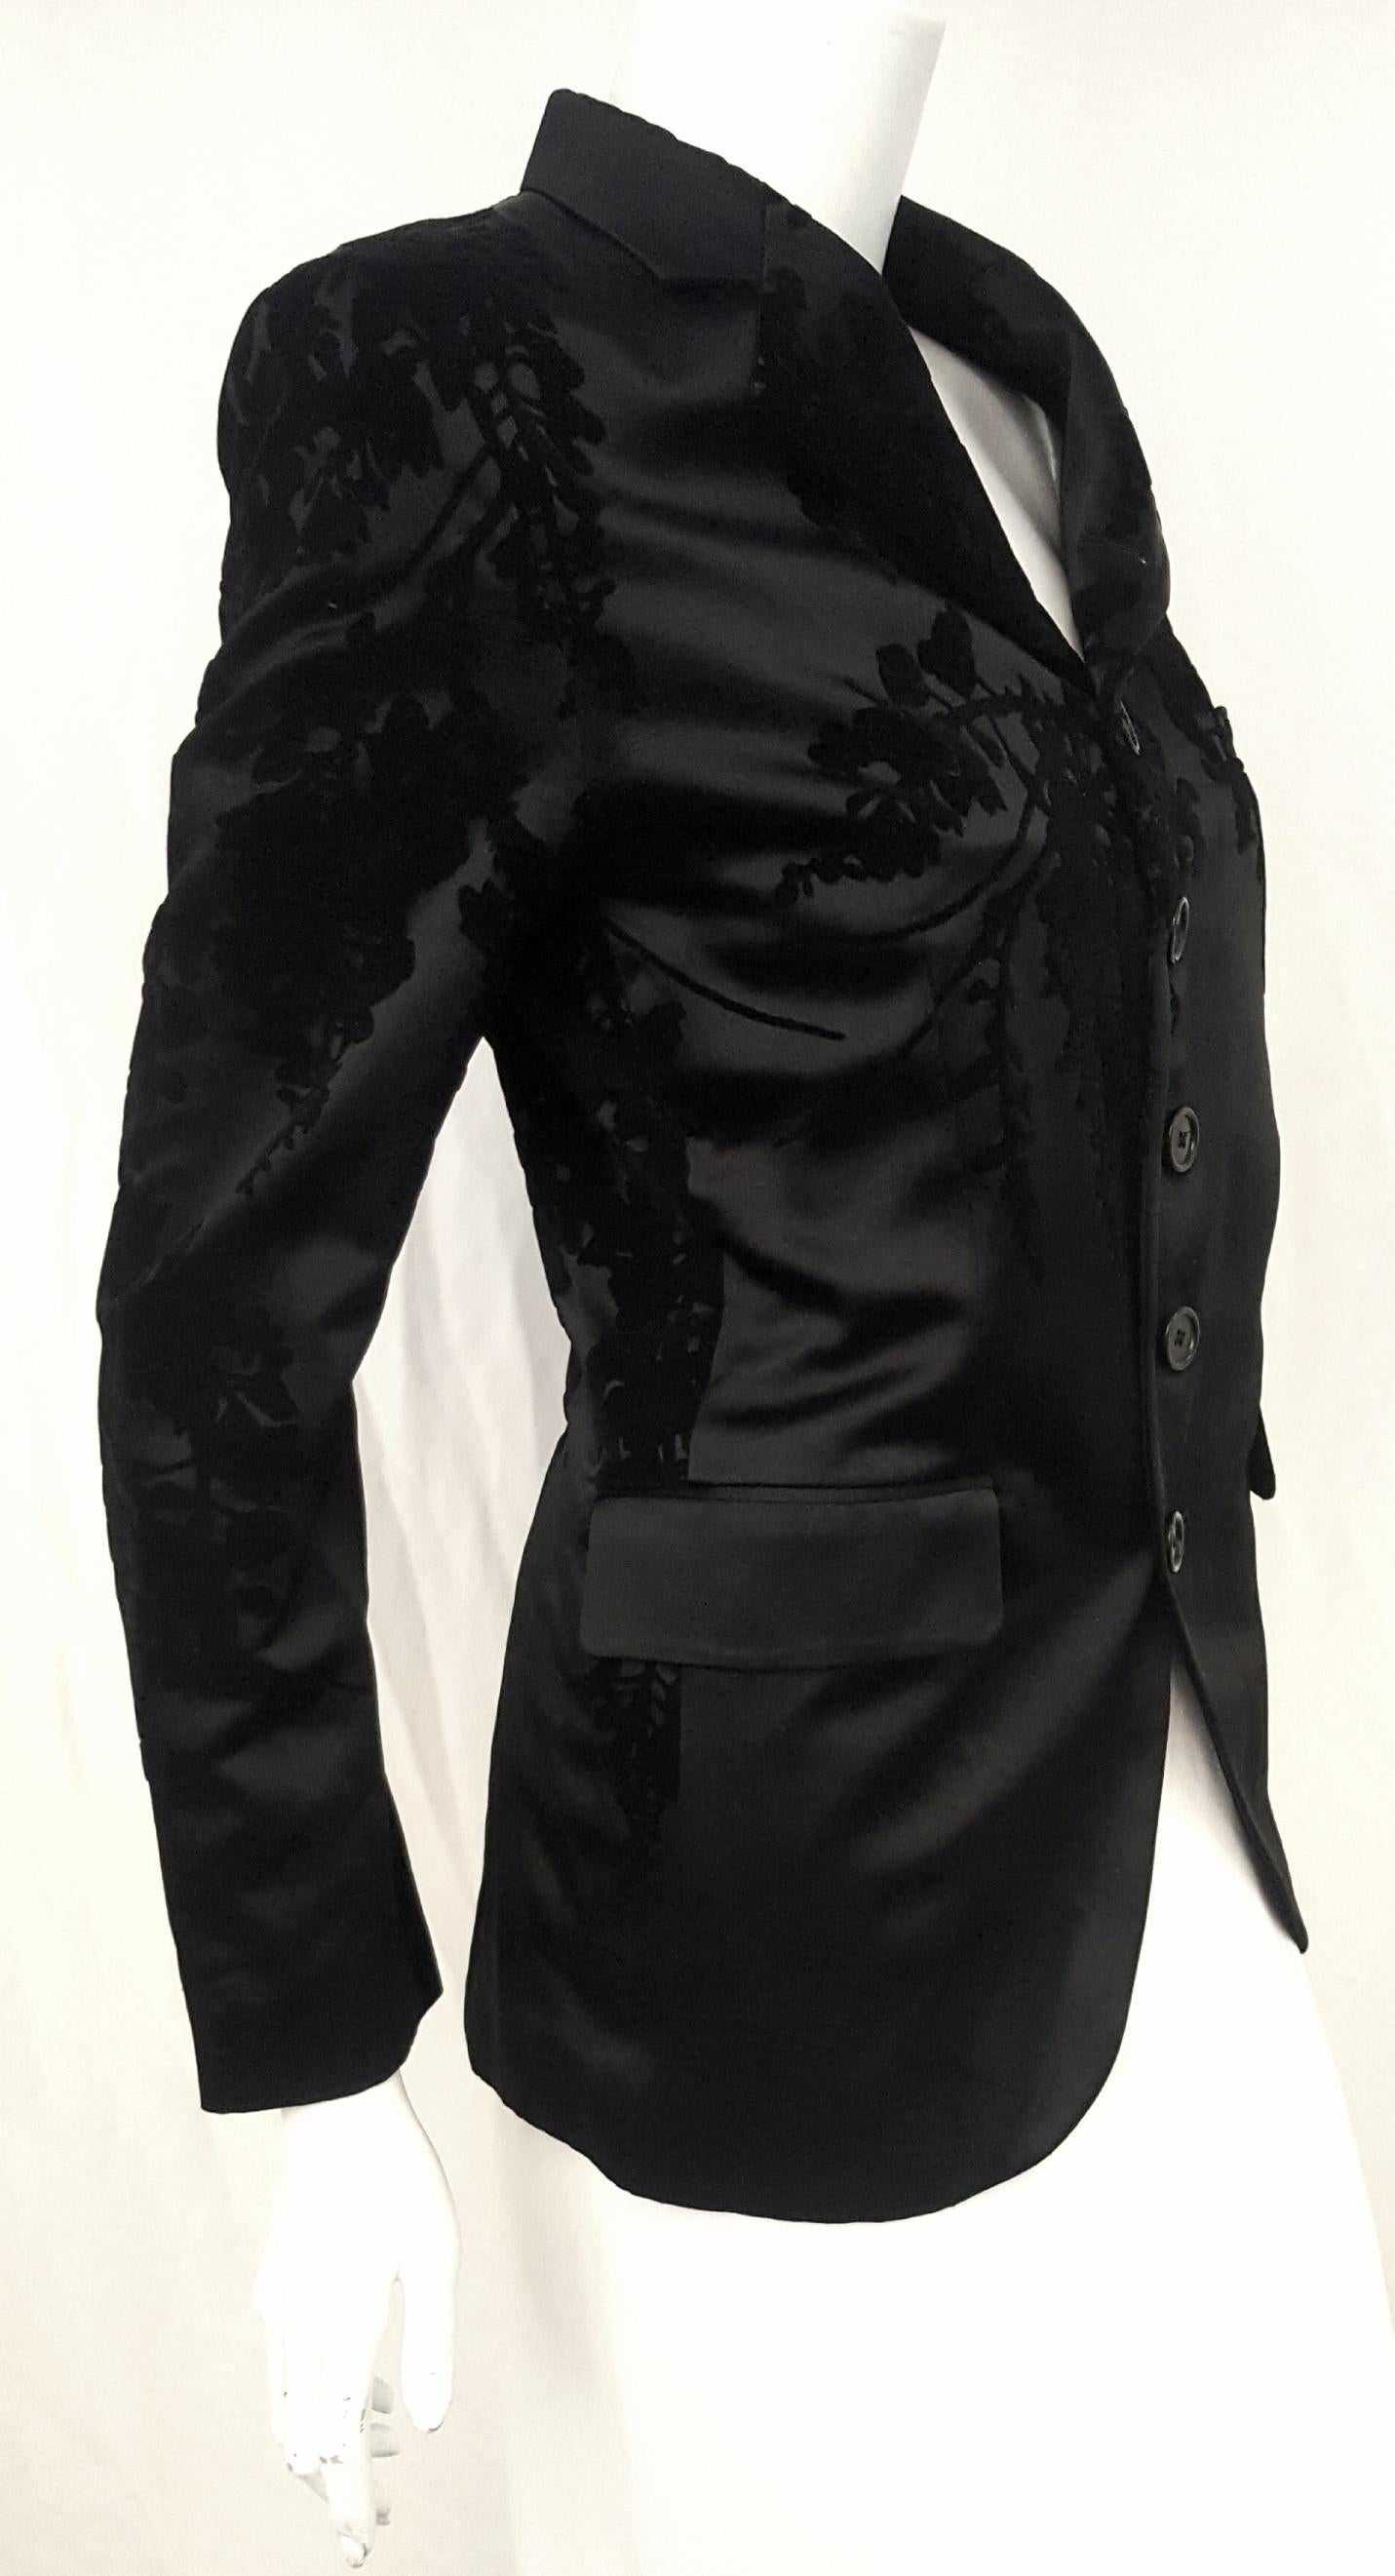 Ann Demeulemeester  Black Velvet  and Satin Jacket Size Medium In Excellent Condition For Sale In Palm Beach, FL